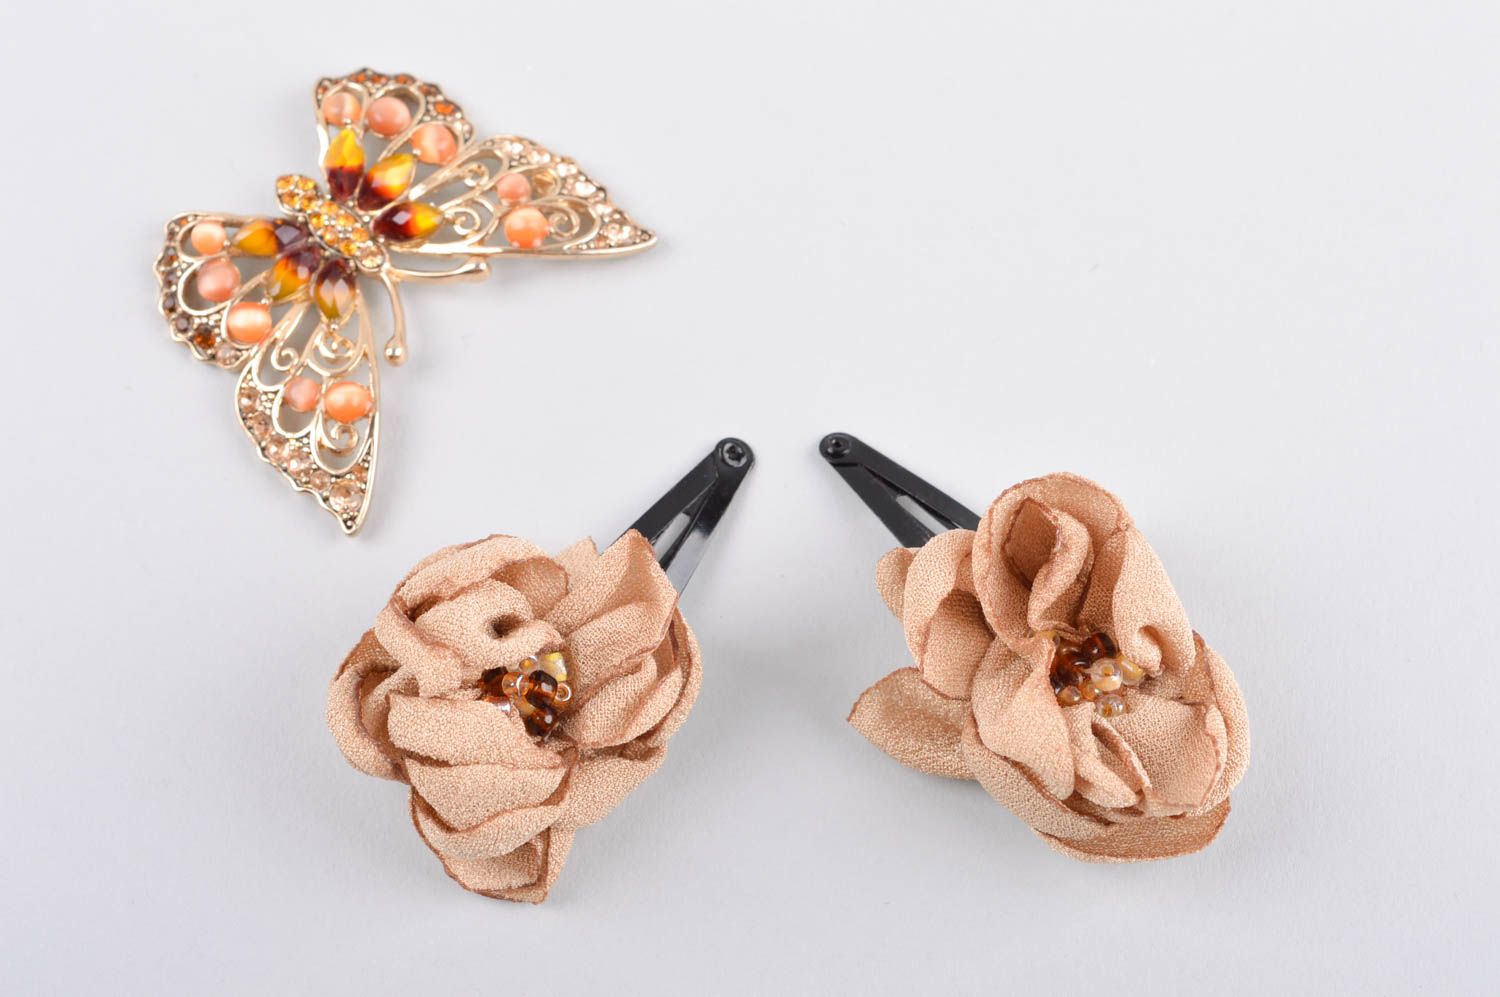 Handmade hair clips flower hair accessories flowers for hair gifts for girls photo 1